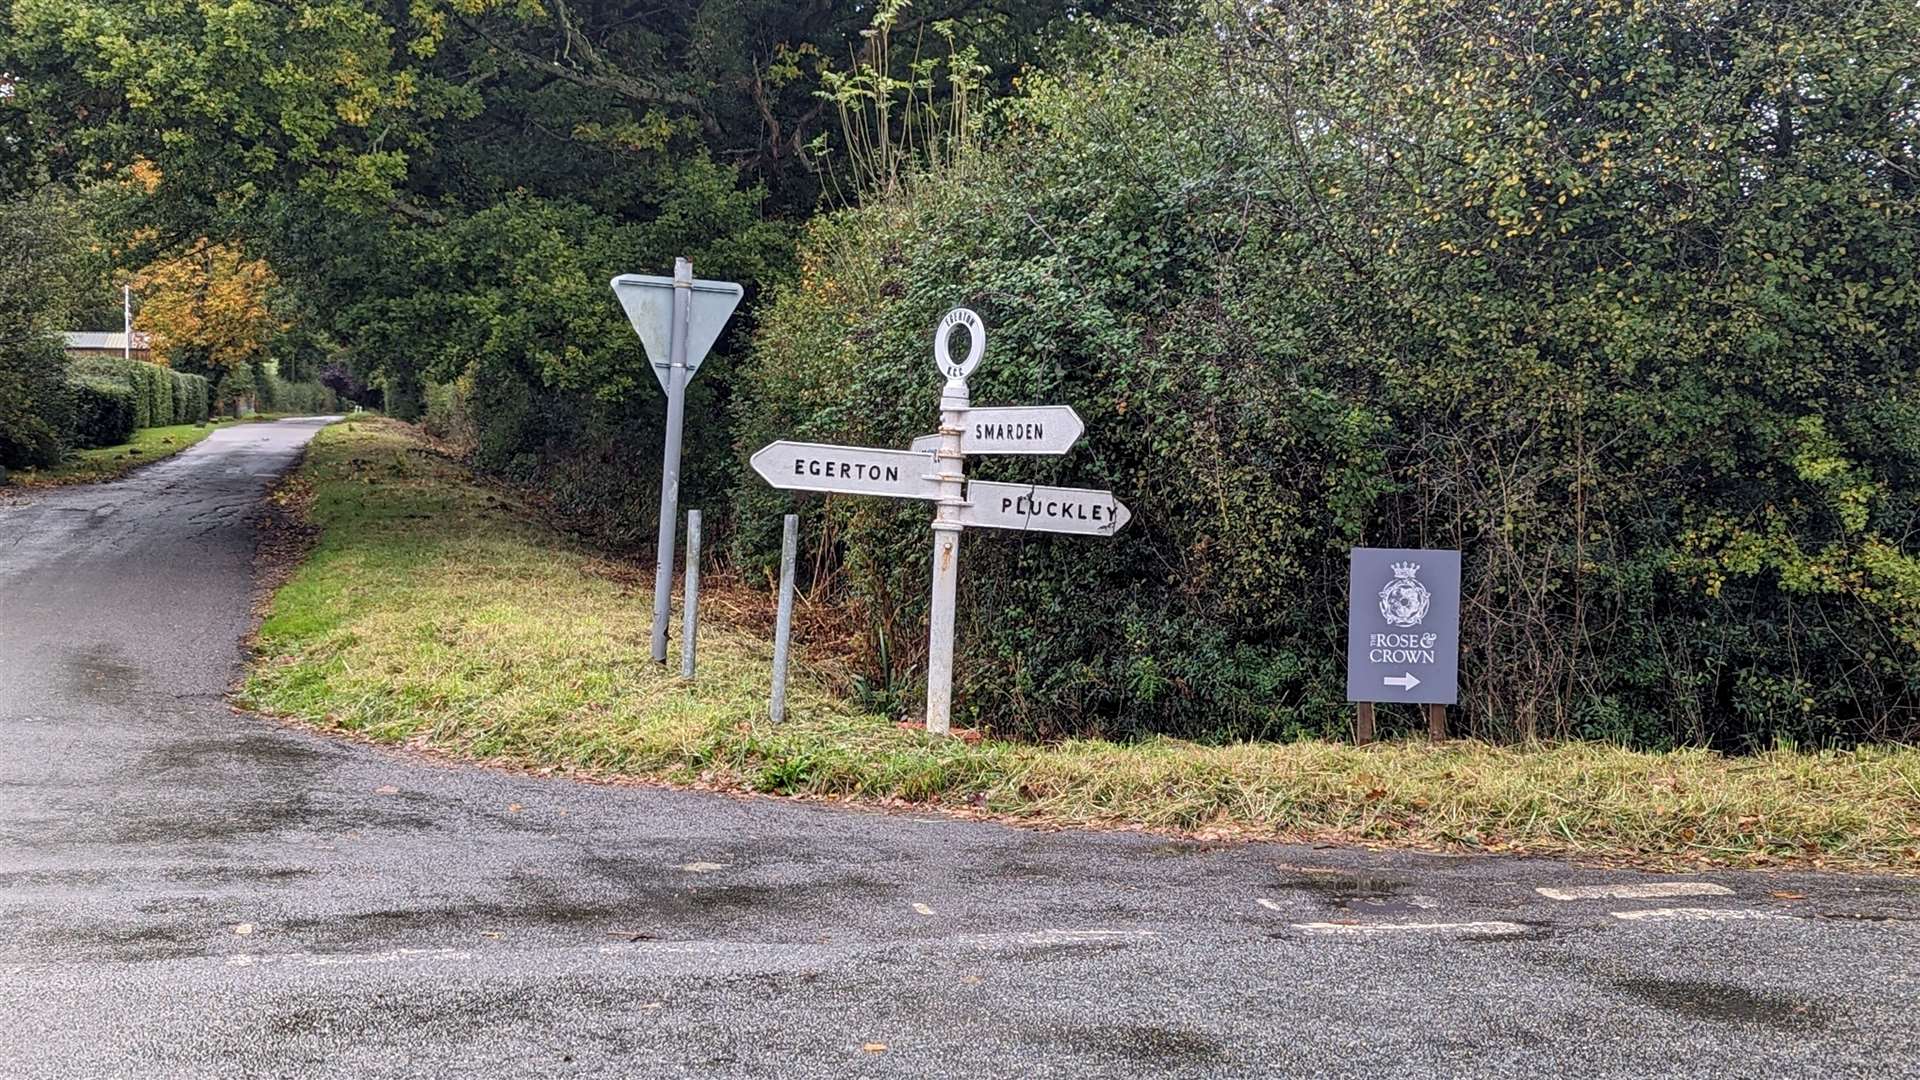 An antique road sign points the way towards Pluckley